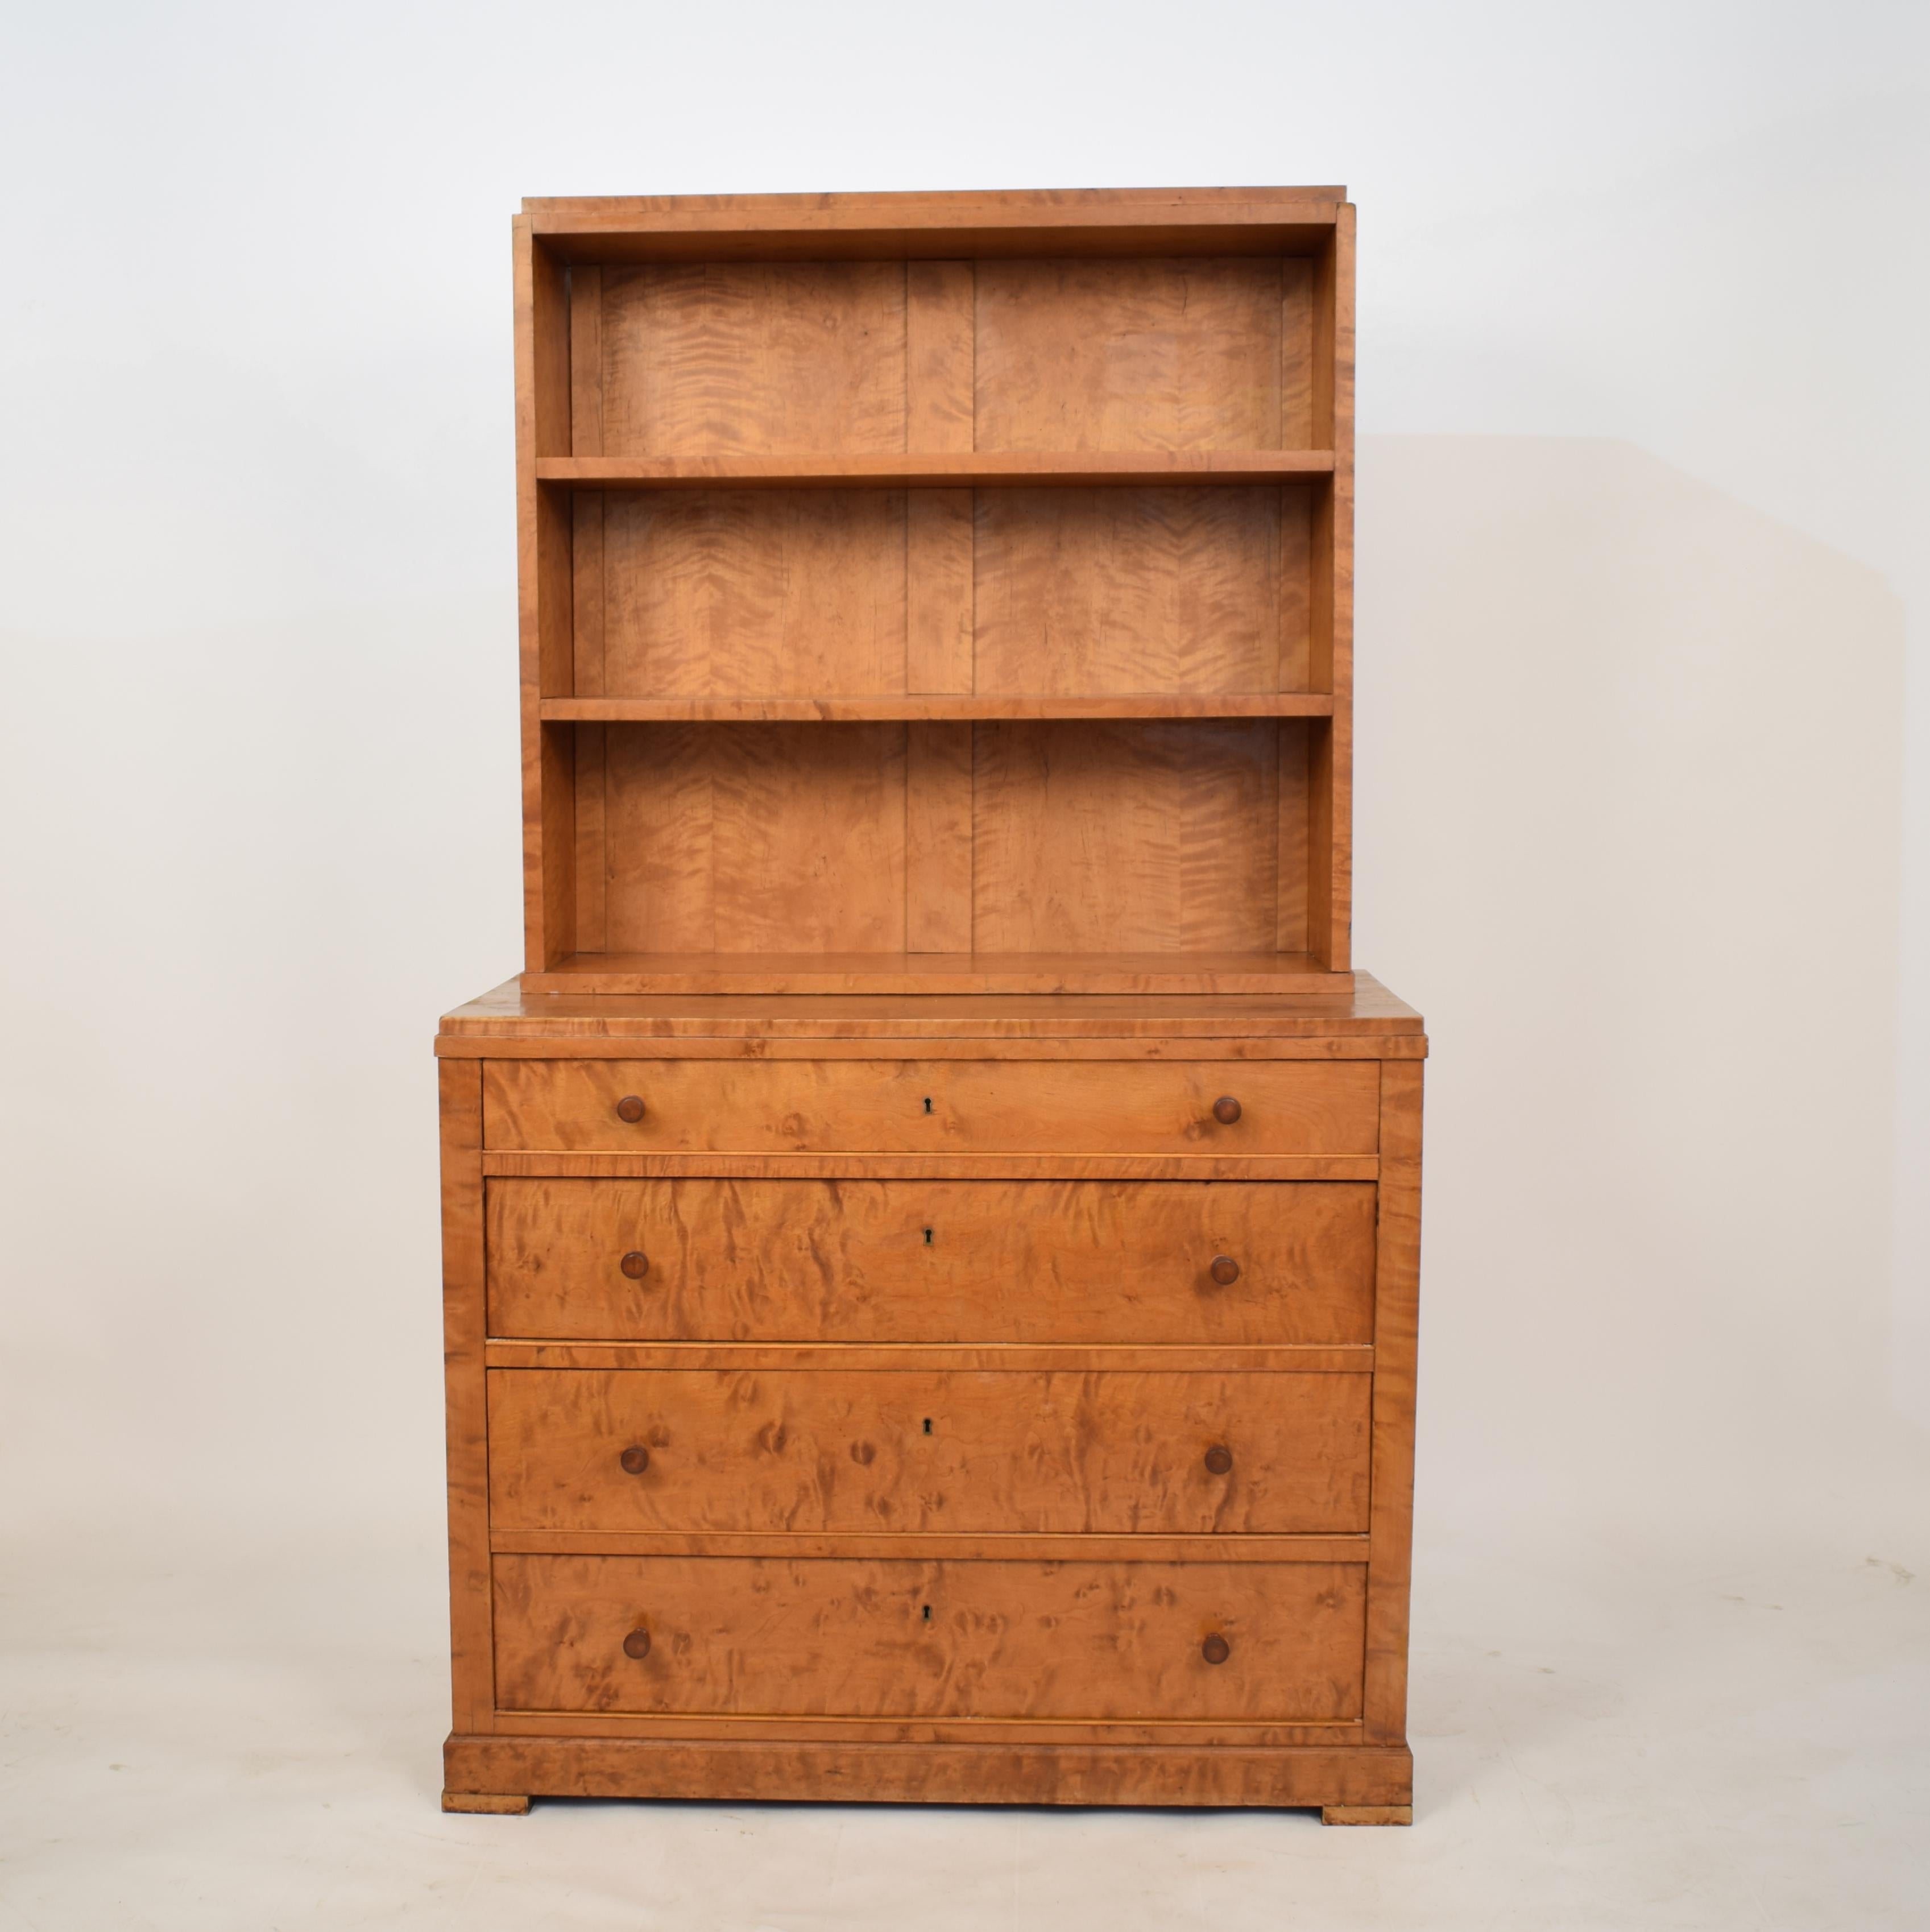 This elegant German Art Deco bookcase or chest of drawers was made in the 1930s.
It is in birch veneer on oak and pine.
It is in great original condition.
The dimensions are:
The chest: Height 86cm / Wide 100cm / Deep 49cm
The shelf: Height